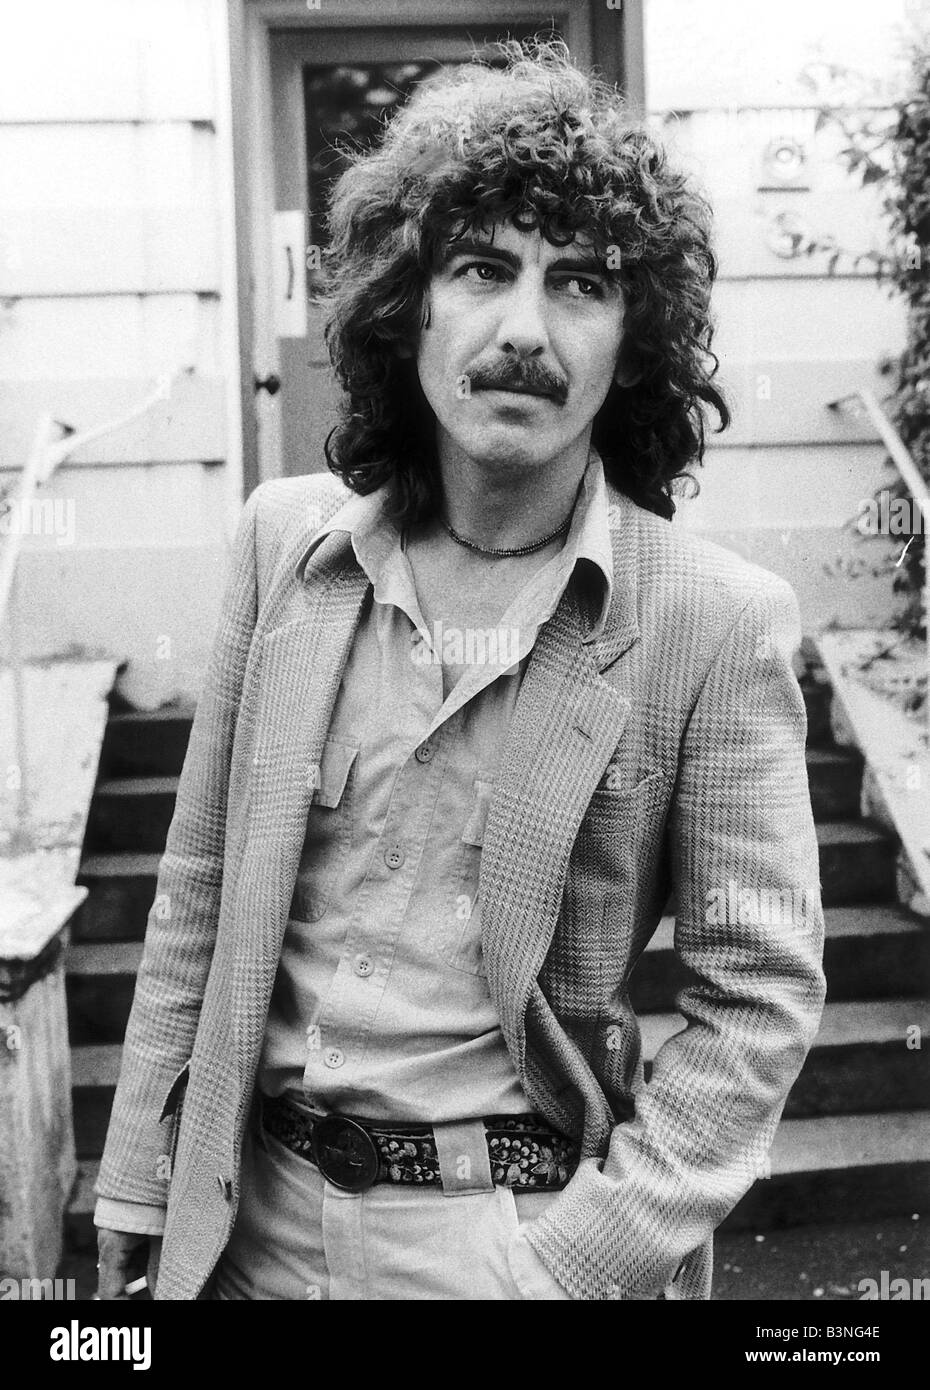 George Harrison Singer with the Beatles Pop Group August 78 is pictured leaving Princess Christian Nursing Home at Windsor where he visited his girlfriend Olivia Arias who just gave birth to a baby boy Dahni Stock Photo